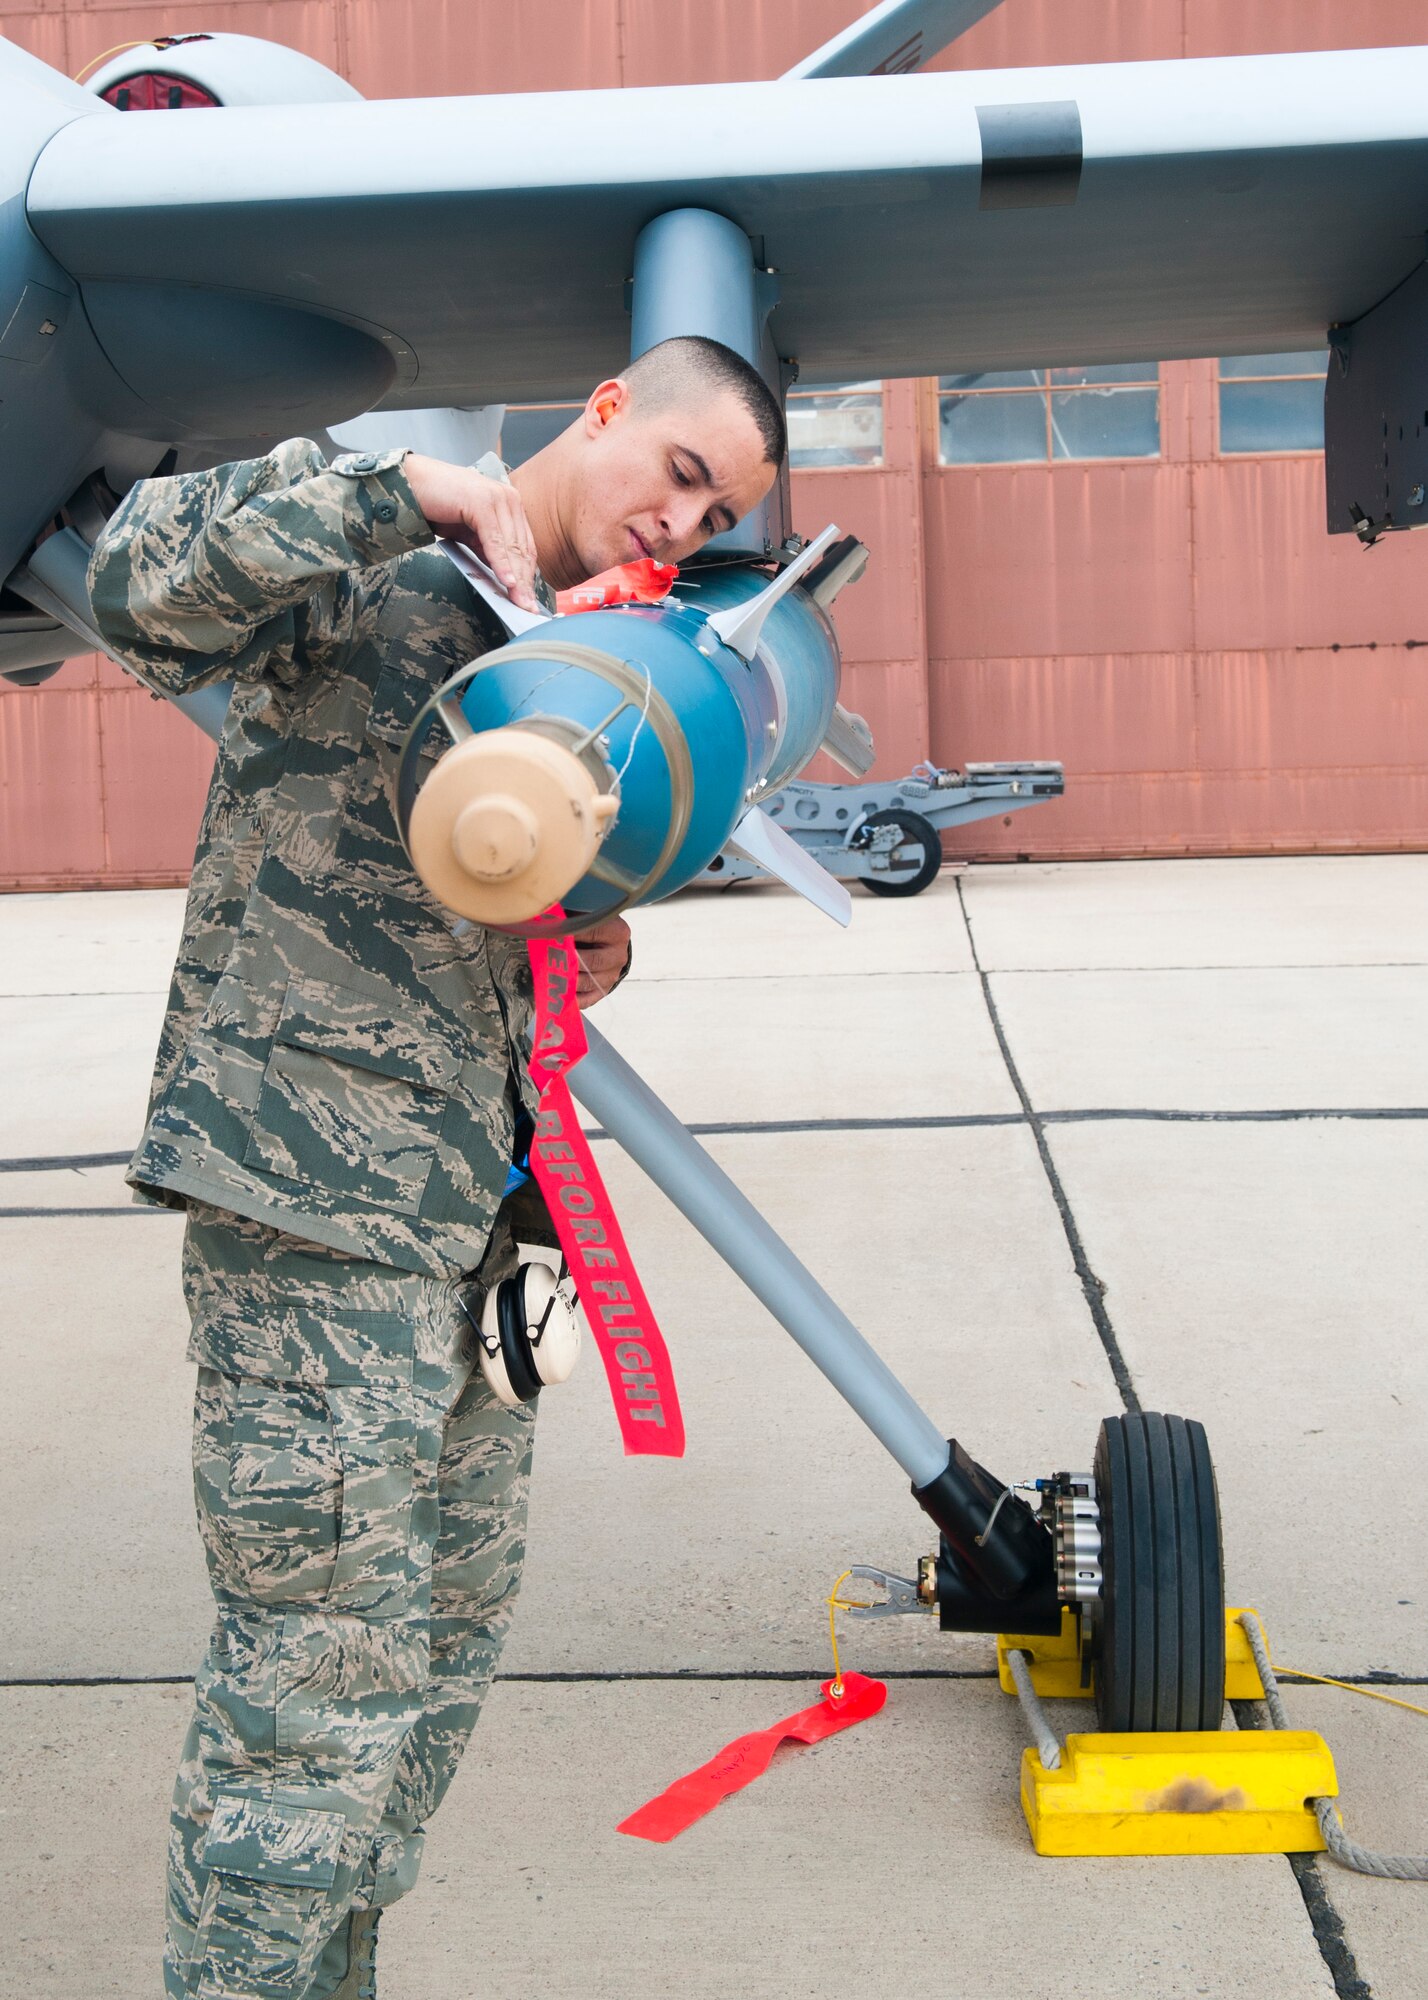 Staff Sgt. Jonathan Adams, 849th Aircraft Maintenance Squadron, checks an inert missile loaded onto an MQ-9 Reaper aircraft during a quarterly load-crew competition at Holloman Air Force Base, N.M., April 5. The MQ-9 load-crew competed in the competition to have their skills evaluated alongside the F-22 Raptor aircraft and German Air Force load-crews. For the competition, points are awarded during the weapons-loading, tool kit inspection, and uniform inspection. (U.S. Air Force photo by Airman 1st Class Leah Murray/Released)